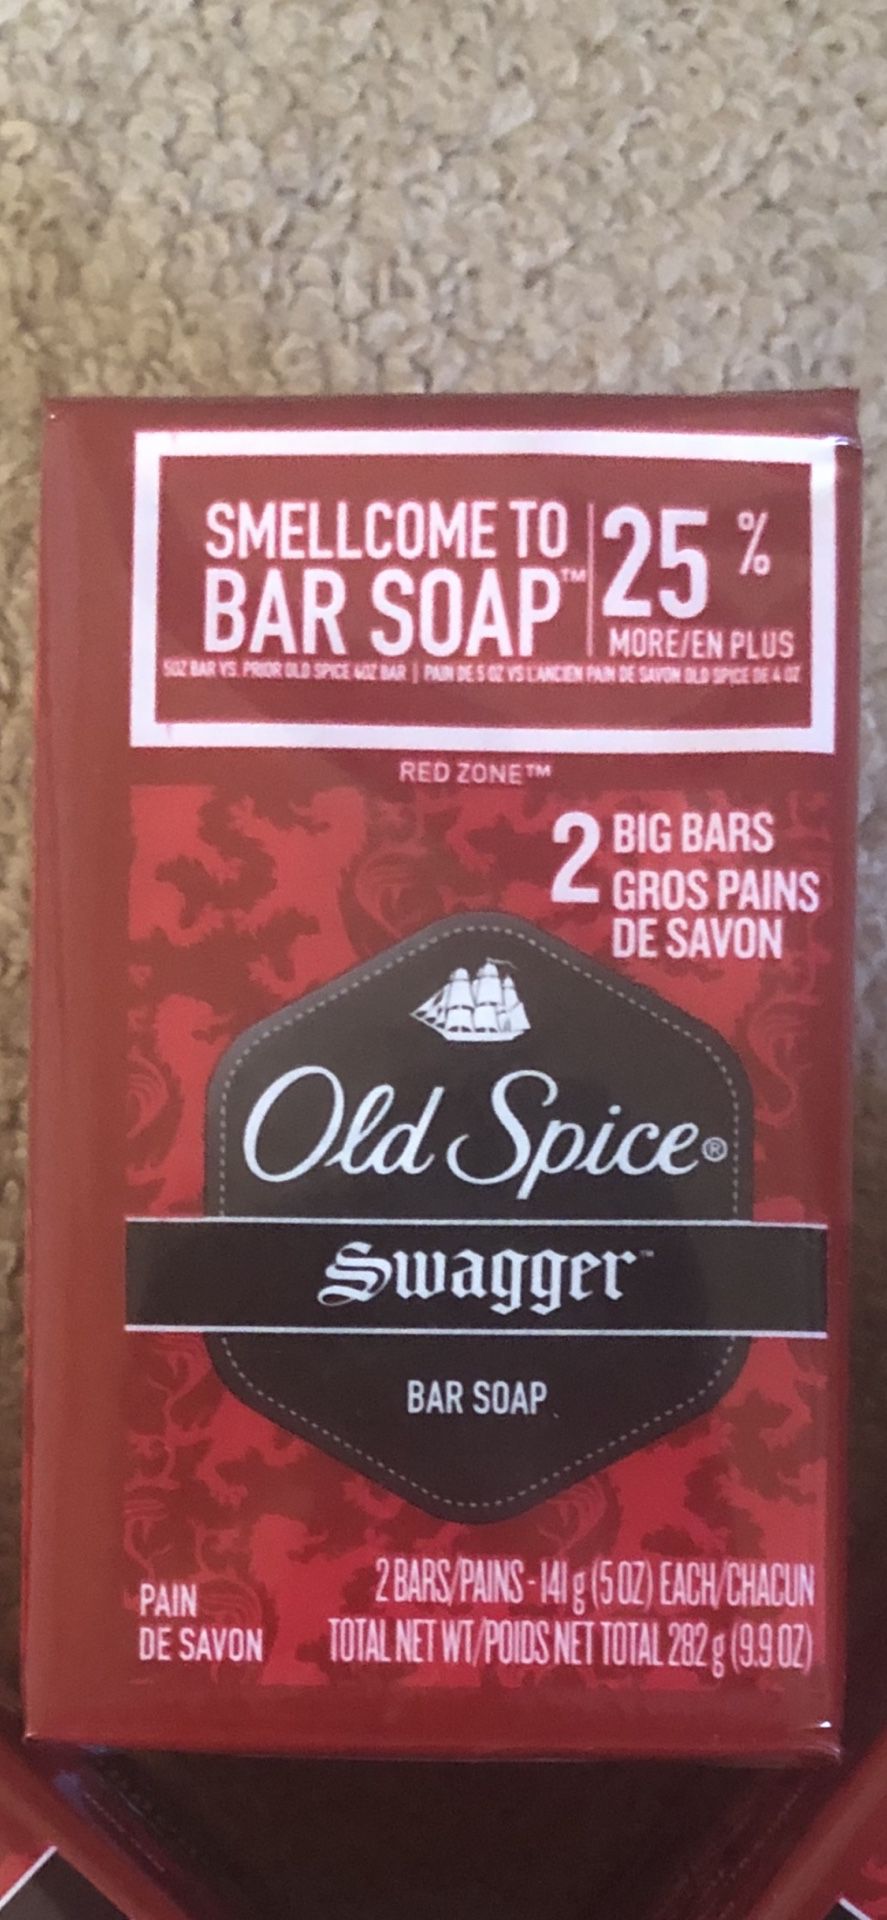 Old spice bar soap